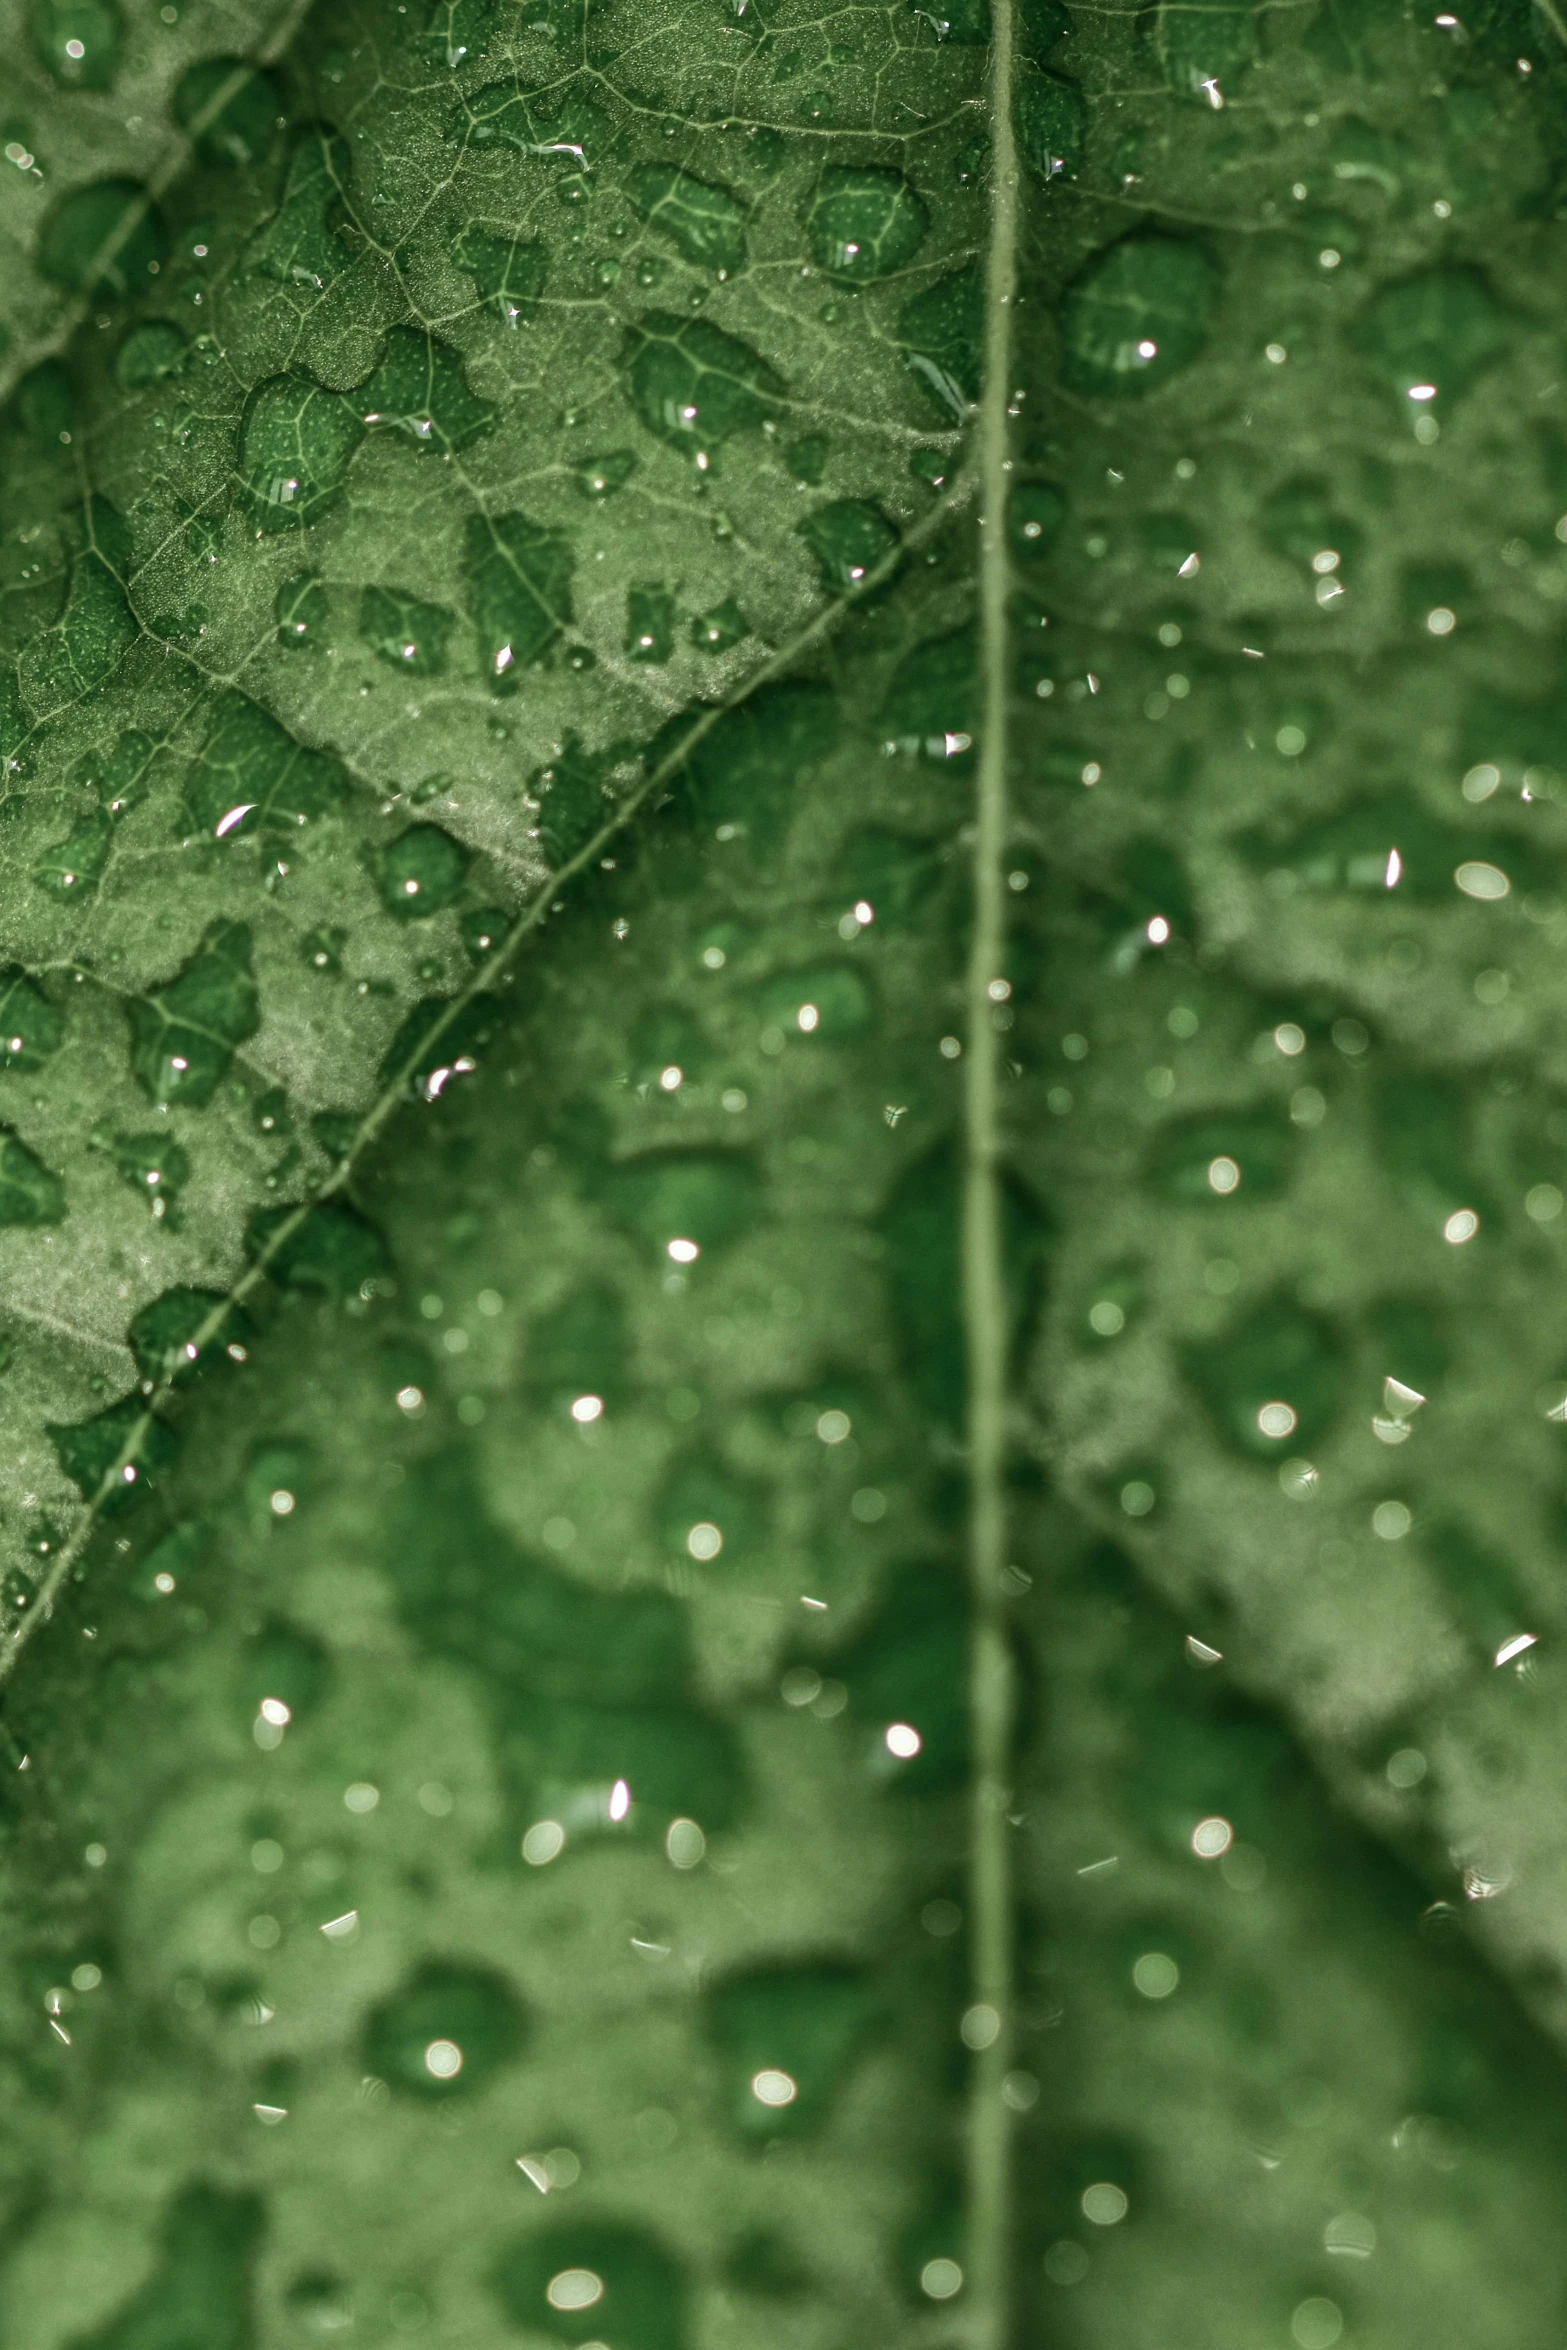 a close up s of the green leaf that is covered with rain